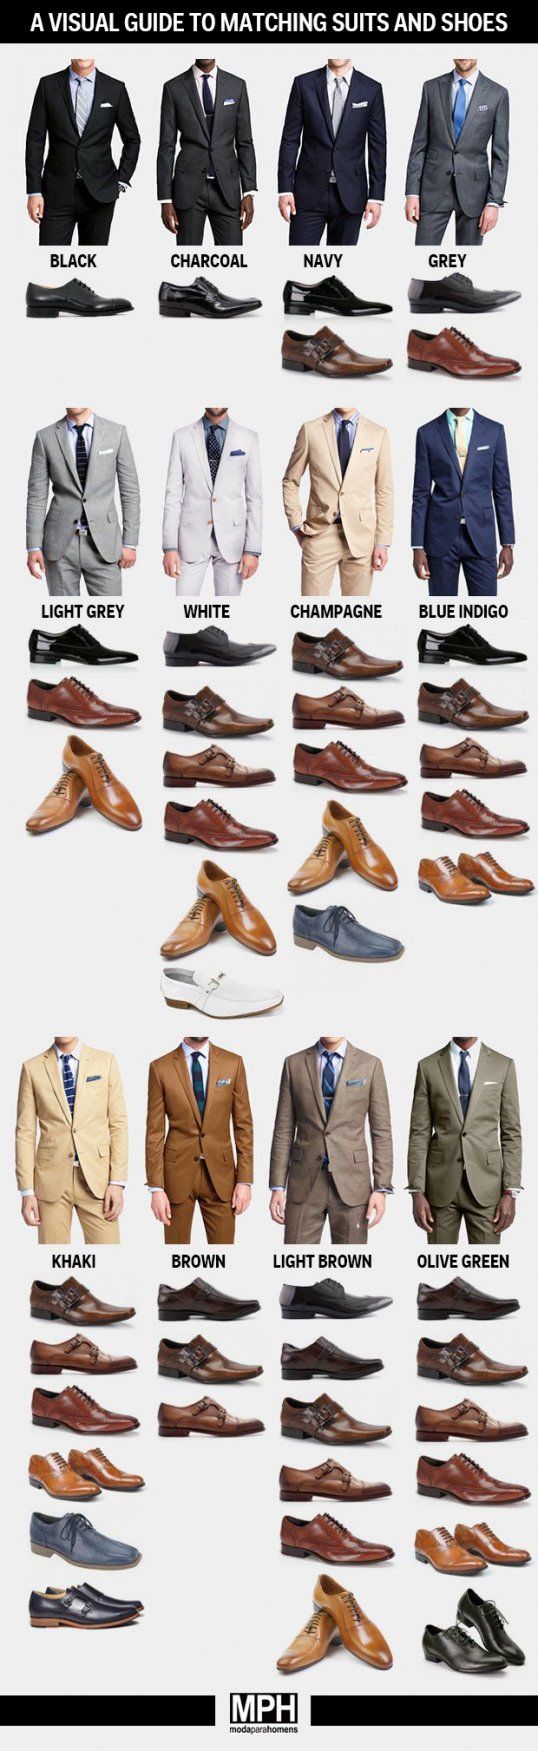 How to pick the perfect pair of shoes for every color suit